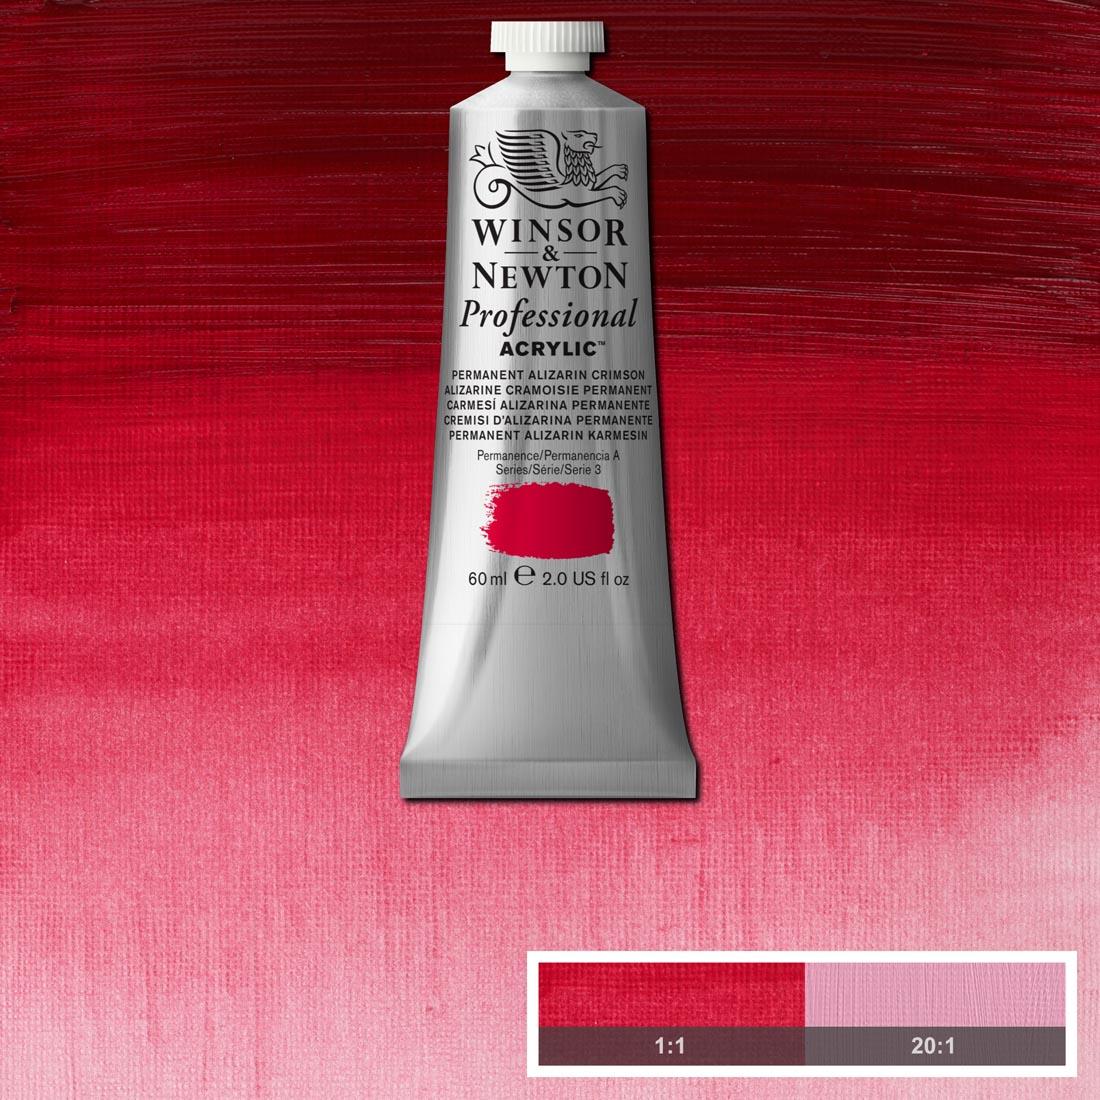 Tube of Permanent Alizarin Crimson Winsor and Newton Professional Acrylic with paint swatch in the background